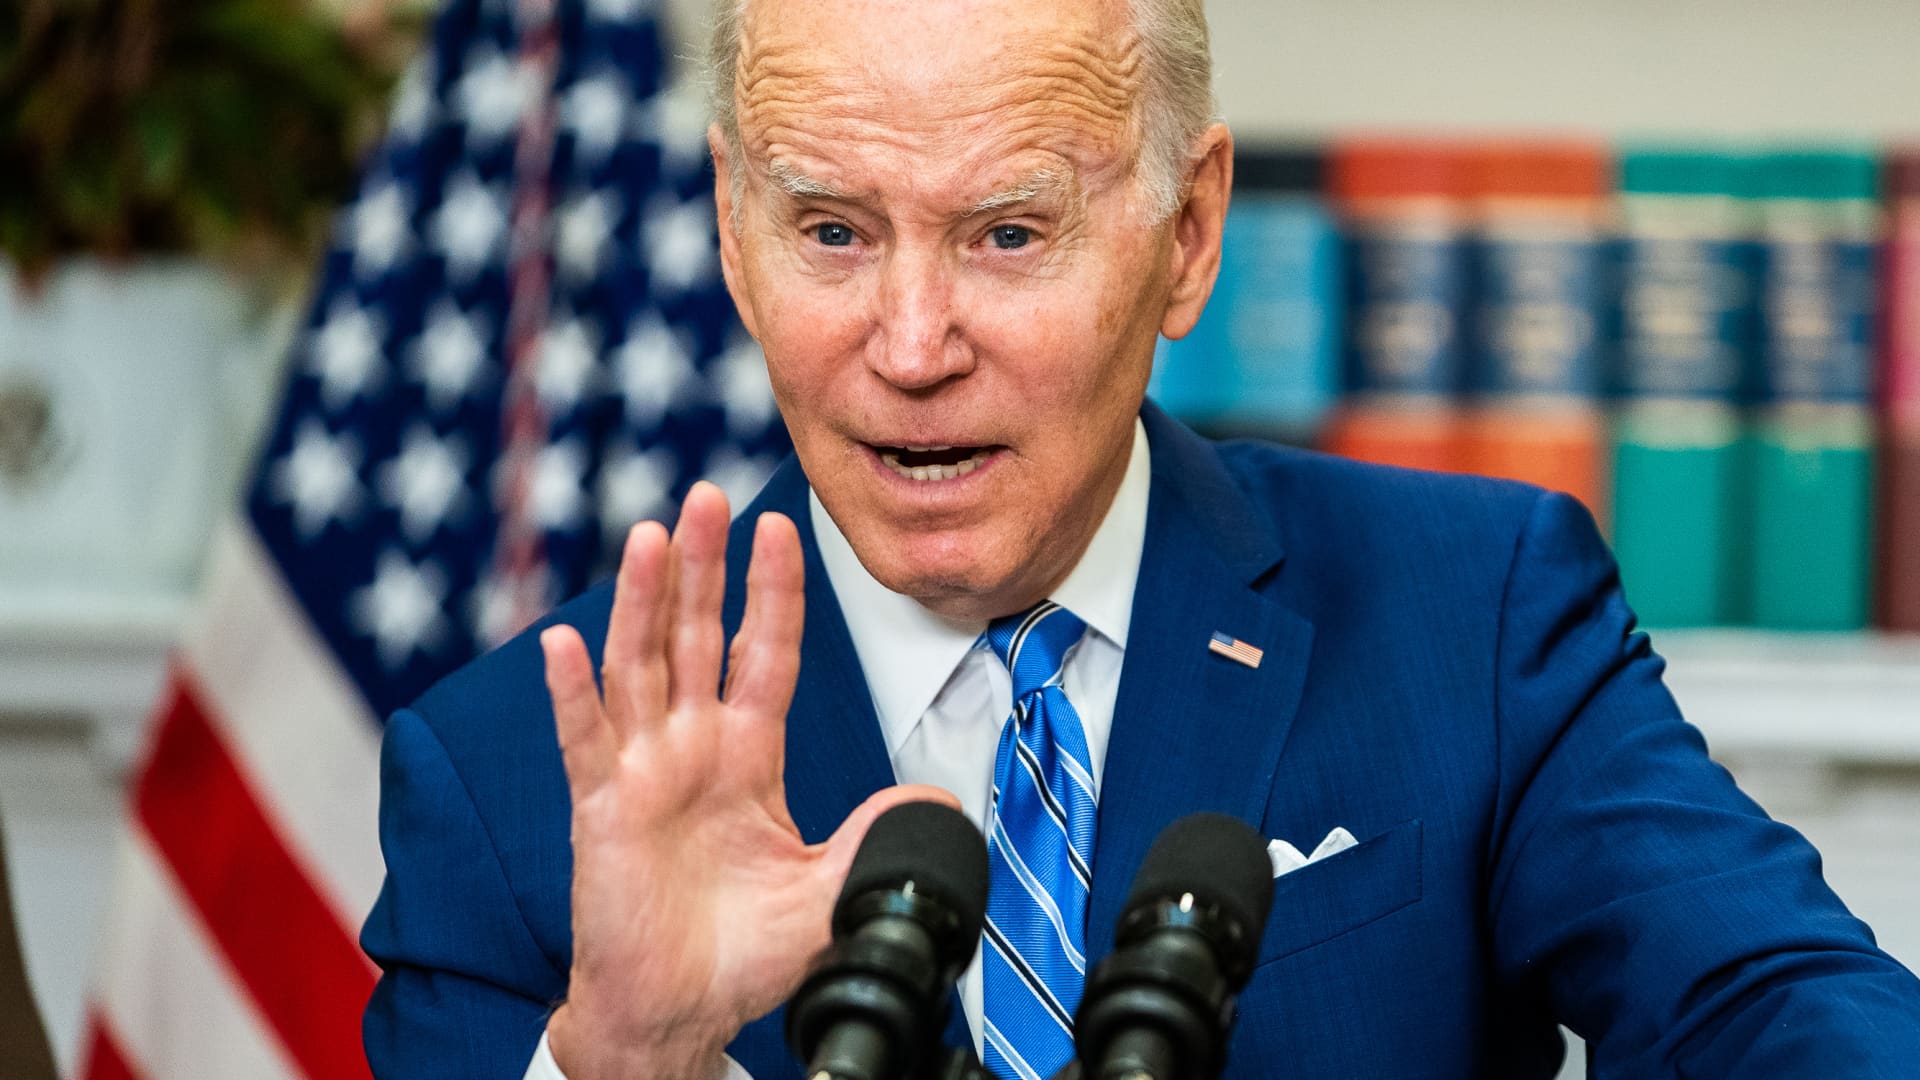 Starbucks criticizes Biden’s visit with union leaders, asking for a meeting in the White House